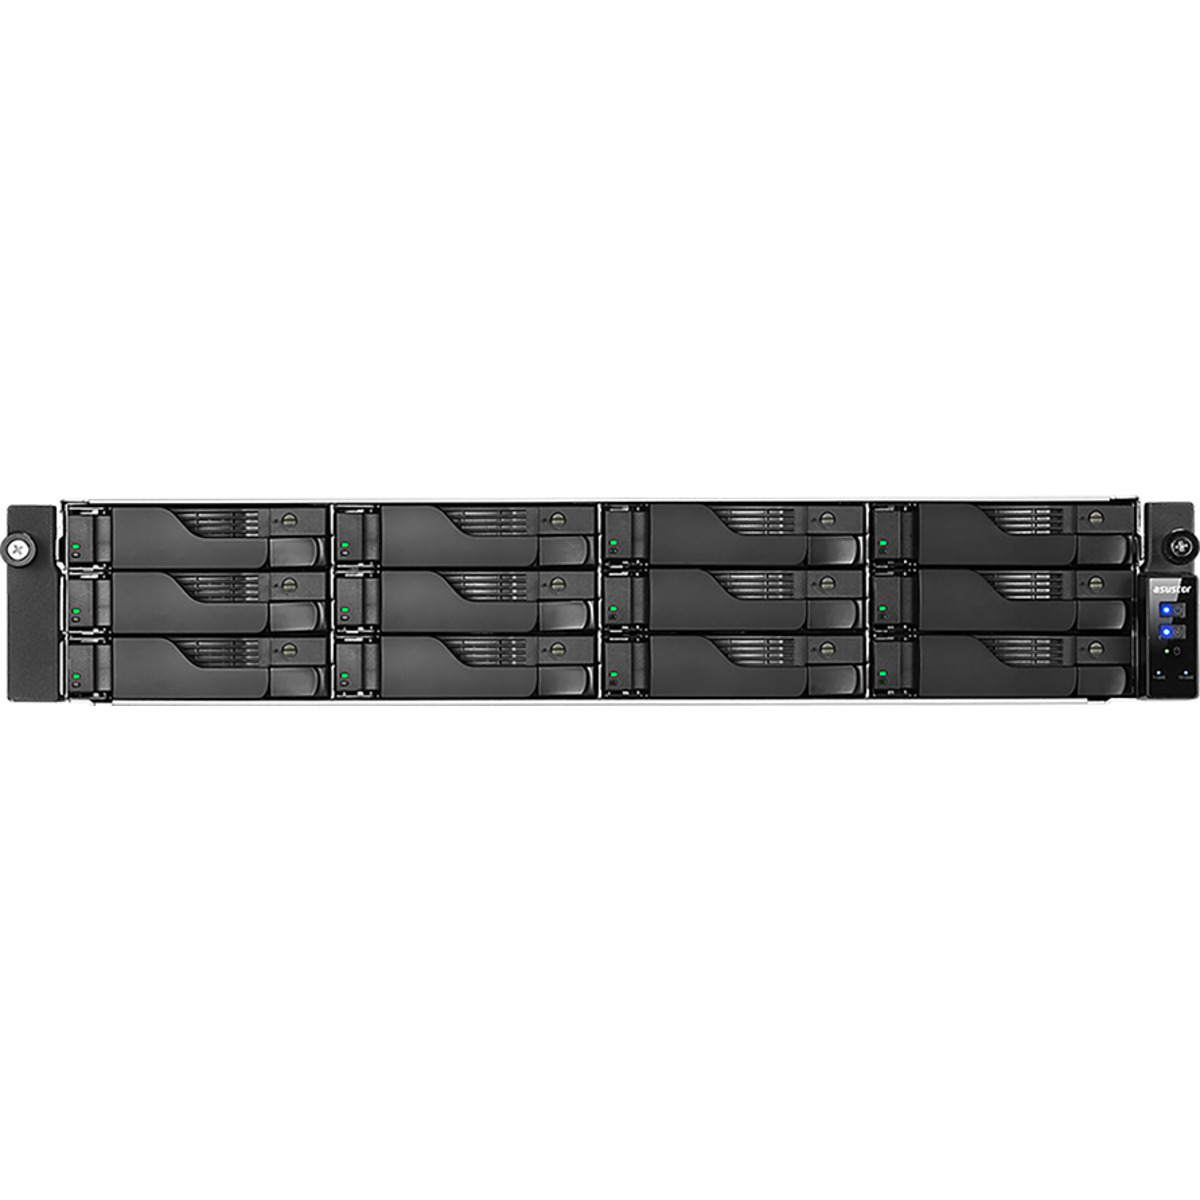 ASUSTOR LOCKERSTOR 12RD AS6512RD 28tb 12-Bay RackMount Multimedia / Power User / Business NAS - Network Attached Storage Device 7x4tb Seagate BarraCuda ST4000DM004 3.5 7200rpm SATA 6Gb/s HDD CONSUMER Class Drives Installed - Burn-In Tested - FREE RAM UPGRADE LOCKERSTOR 12RD AS6512RD